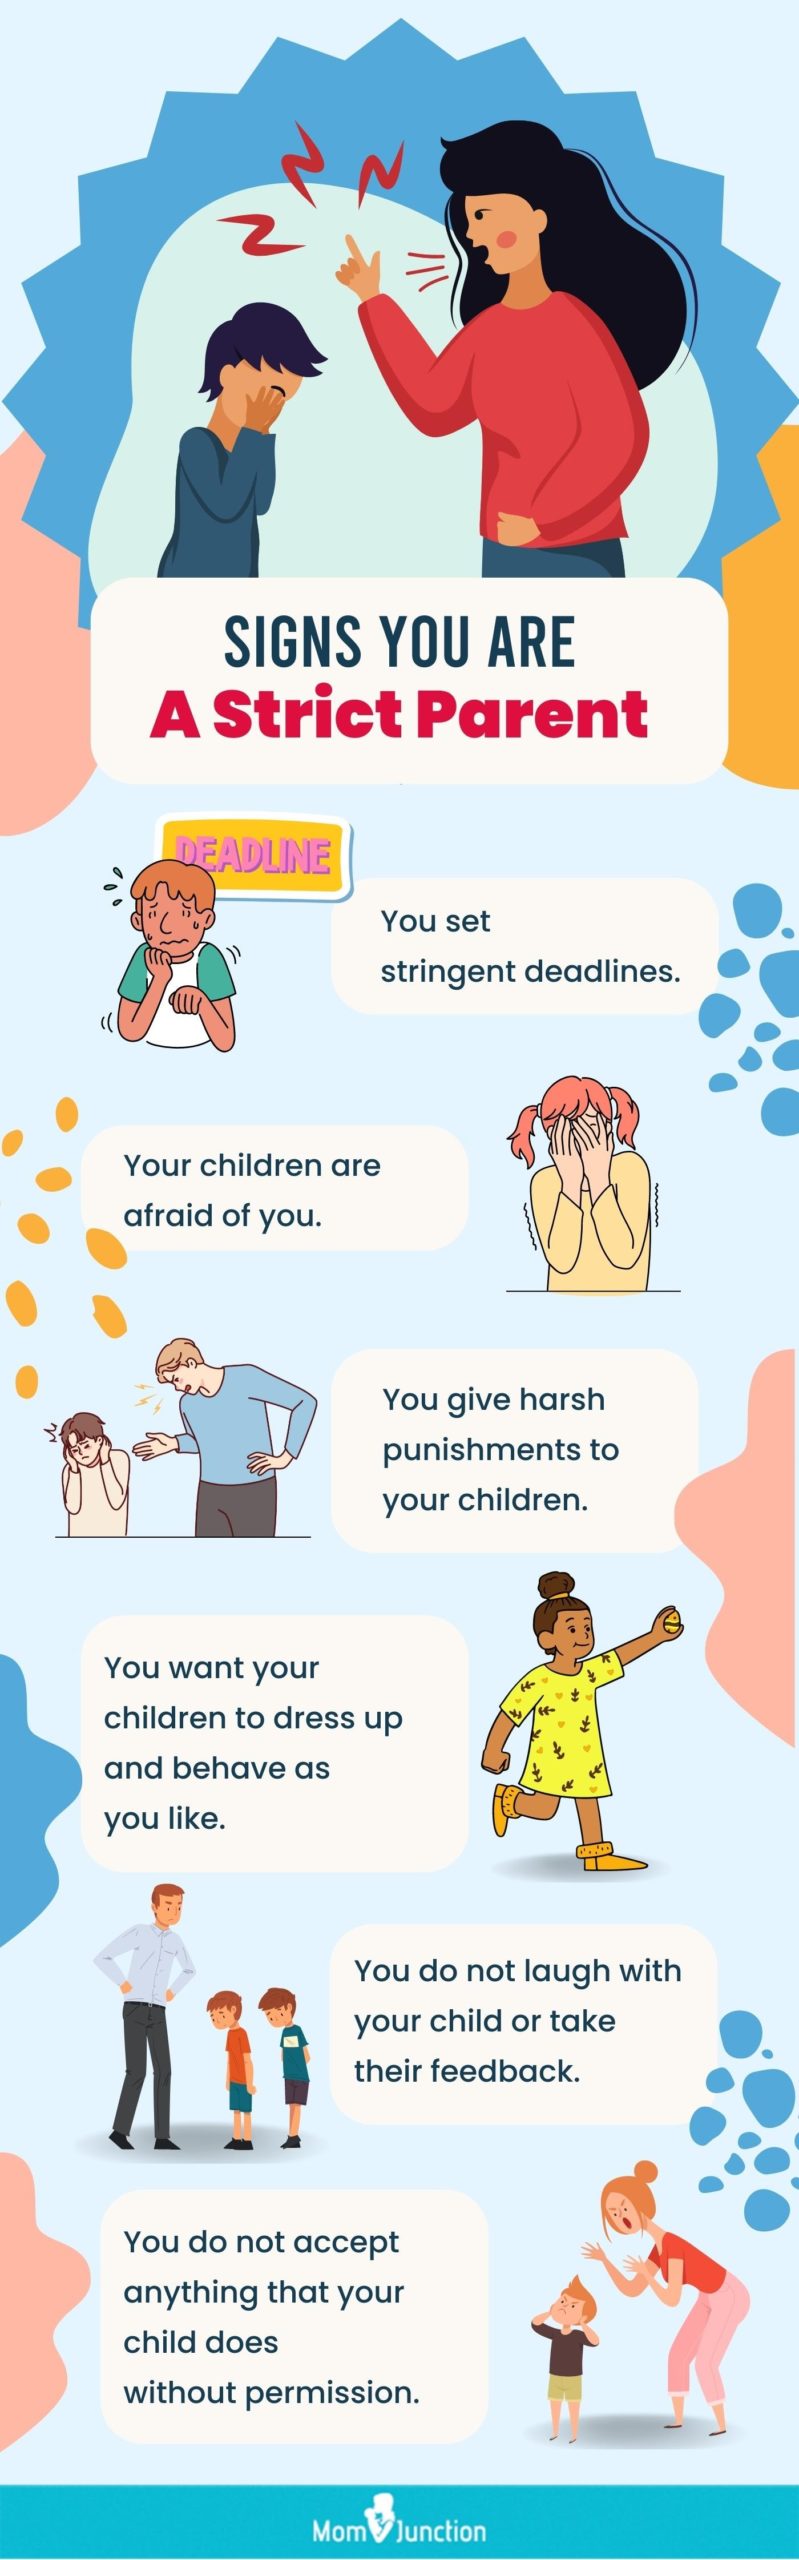 signs you are a strict parent (infographic)